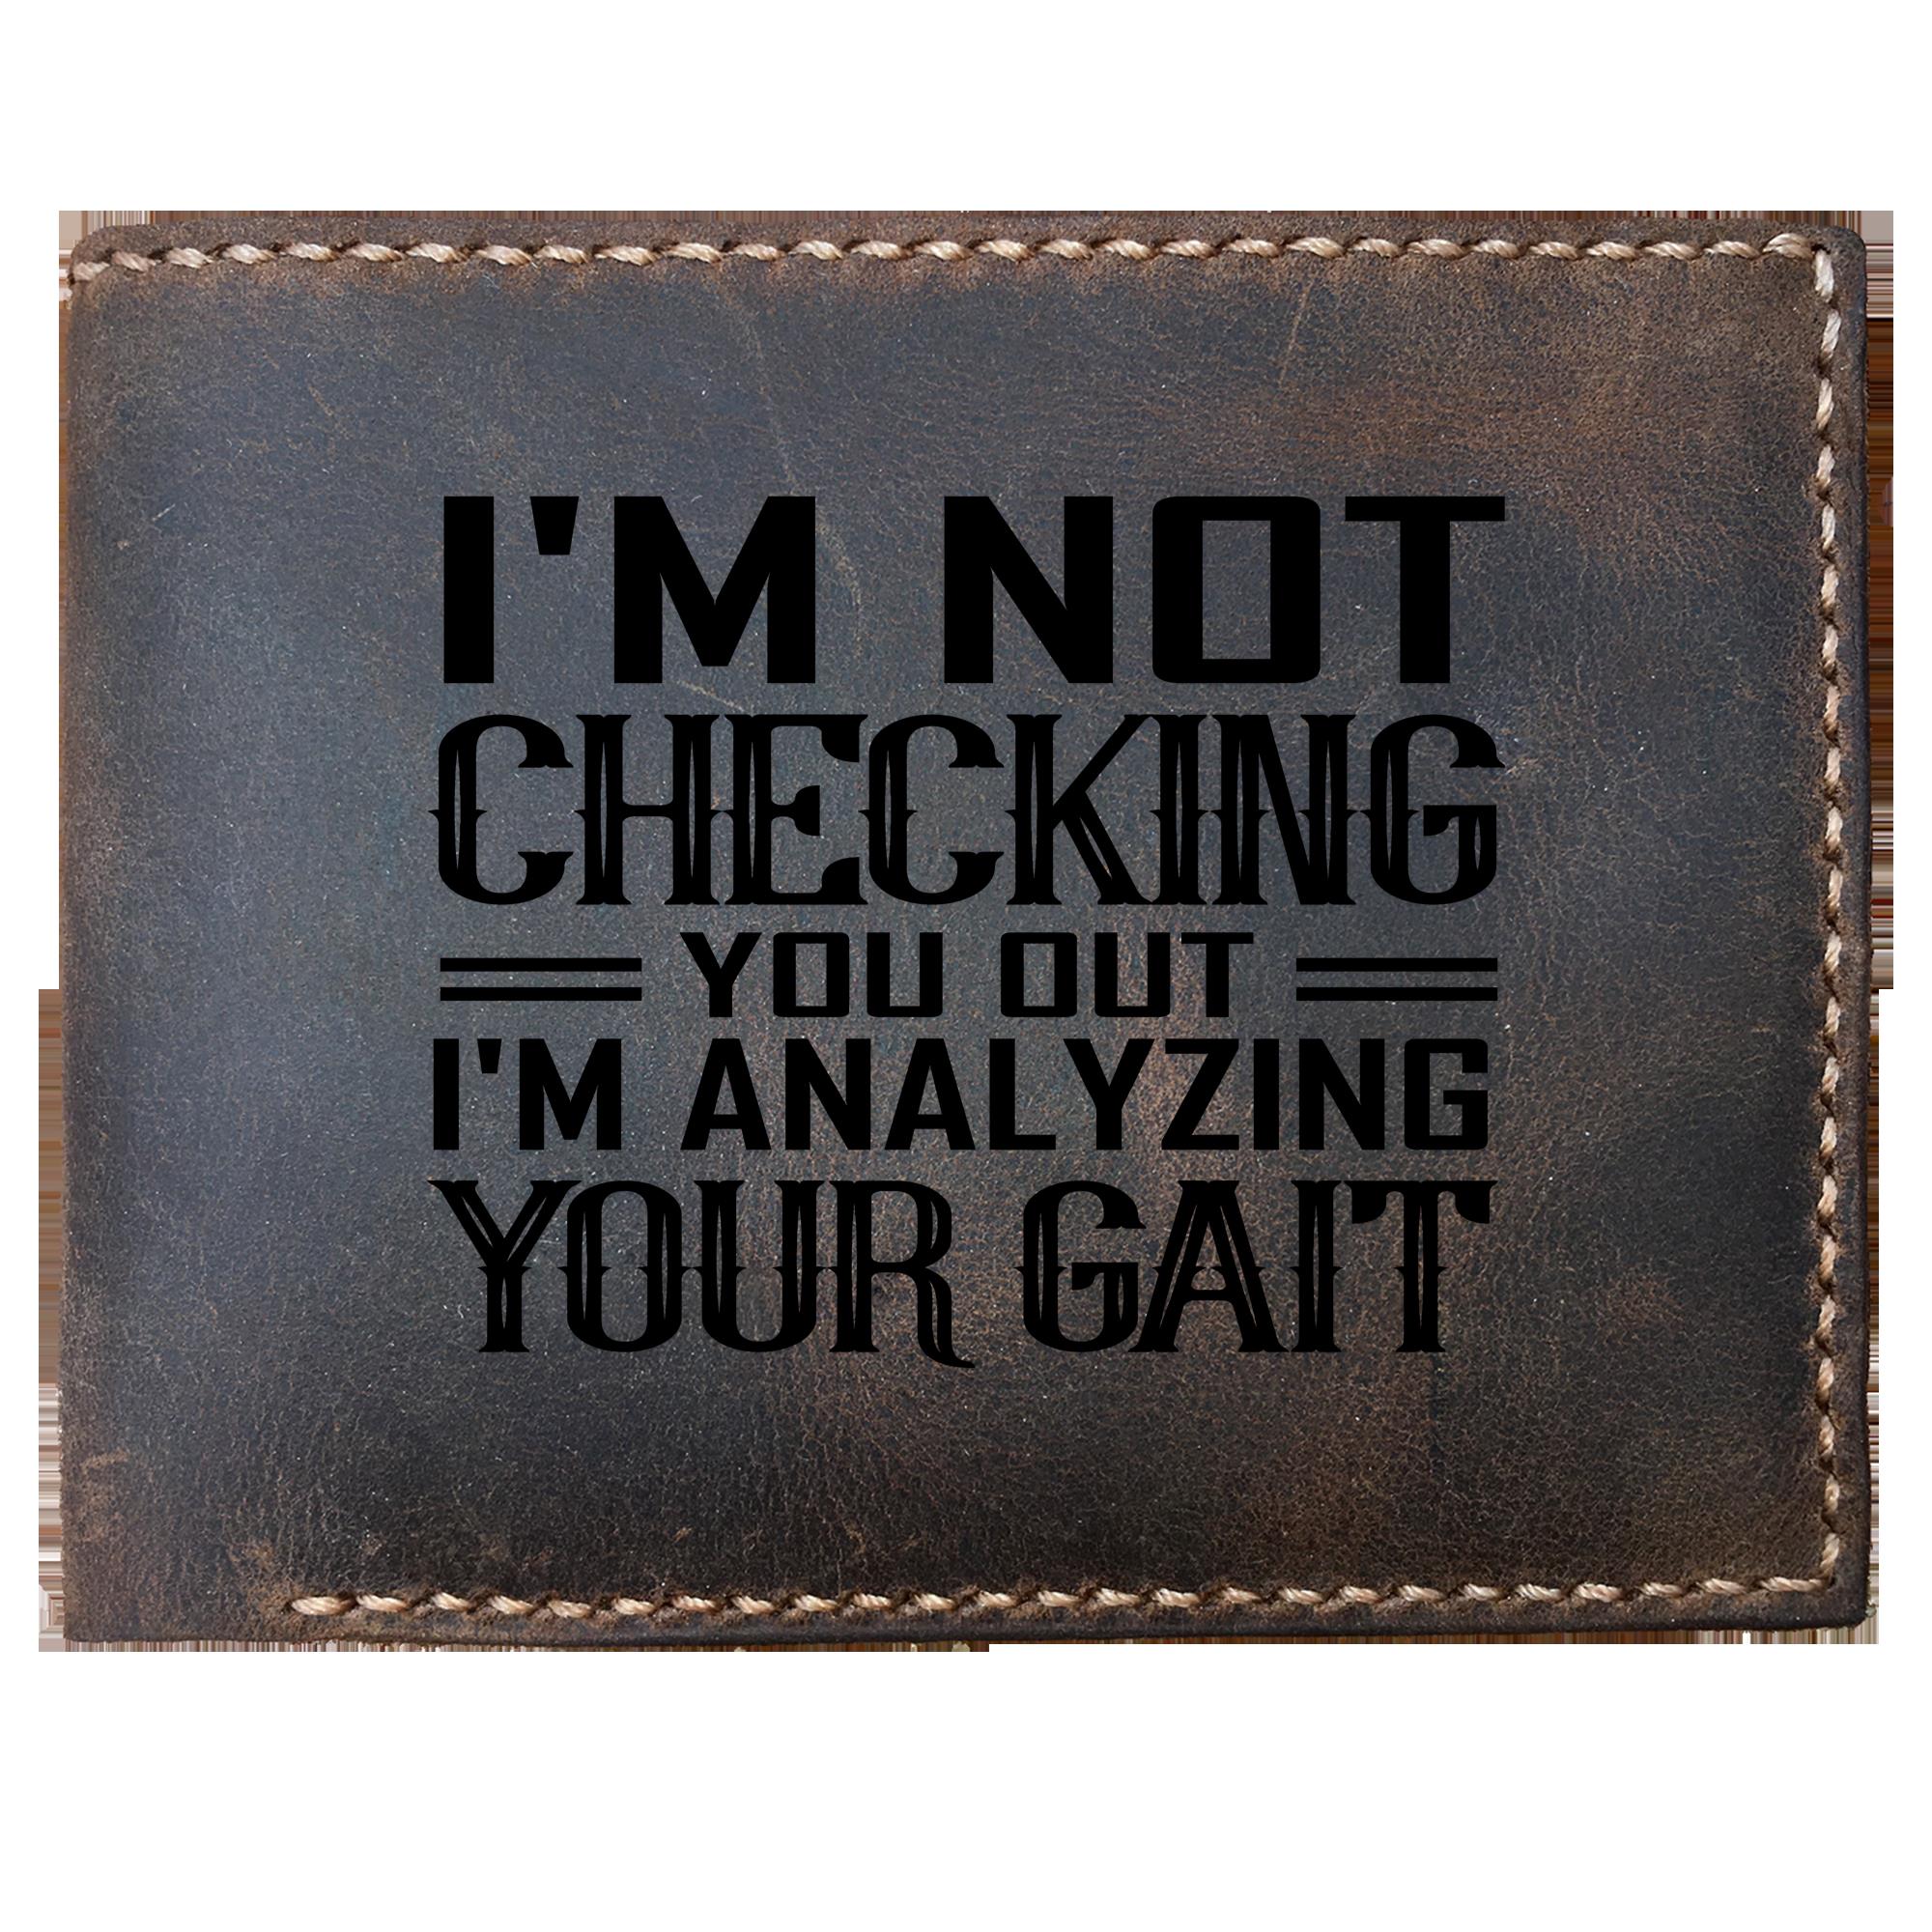 Skitongifts Funny Custom Laser Engraved Bifold Leather Wallet For Men, I Am Not Checking You Out I Am Analyzing Your Gait